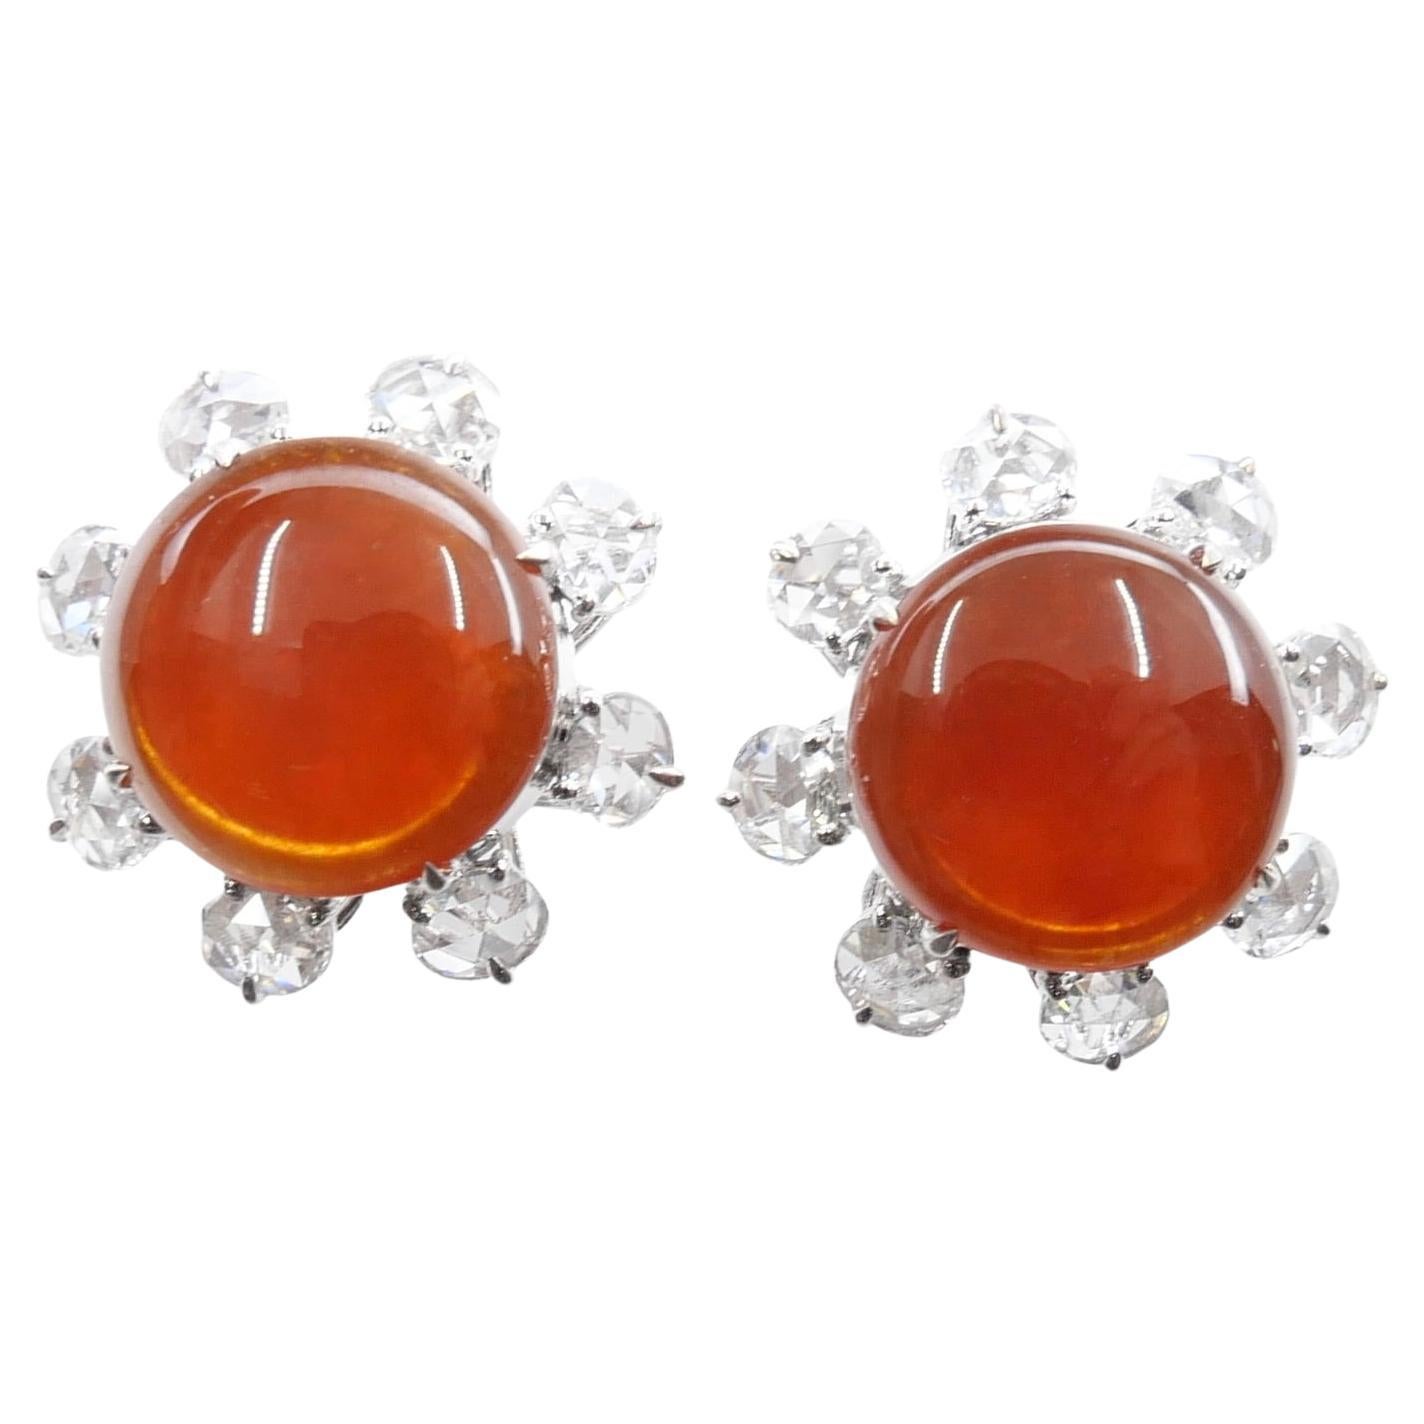 Important Certified Imperial Red Jade & Diamond Stud Earrings, Collector's Item